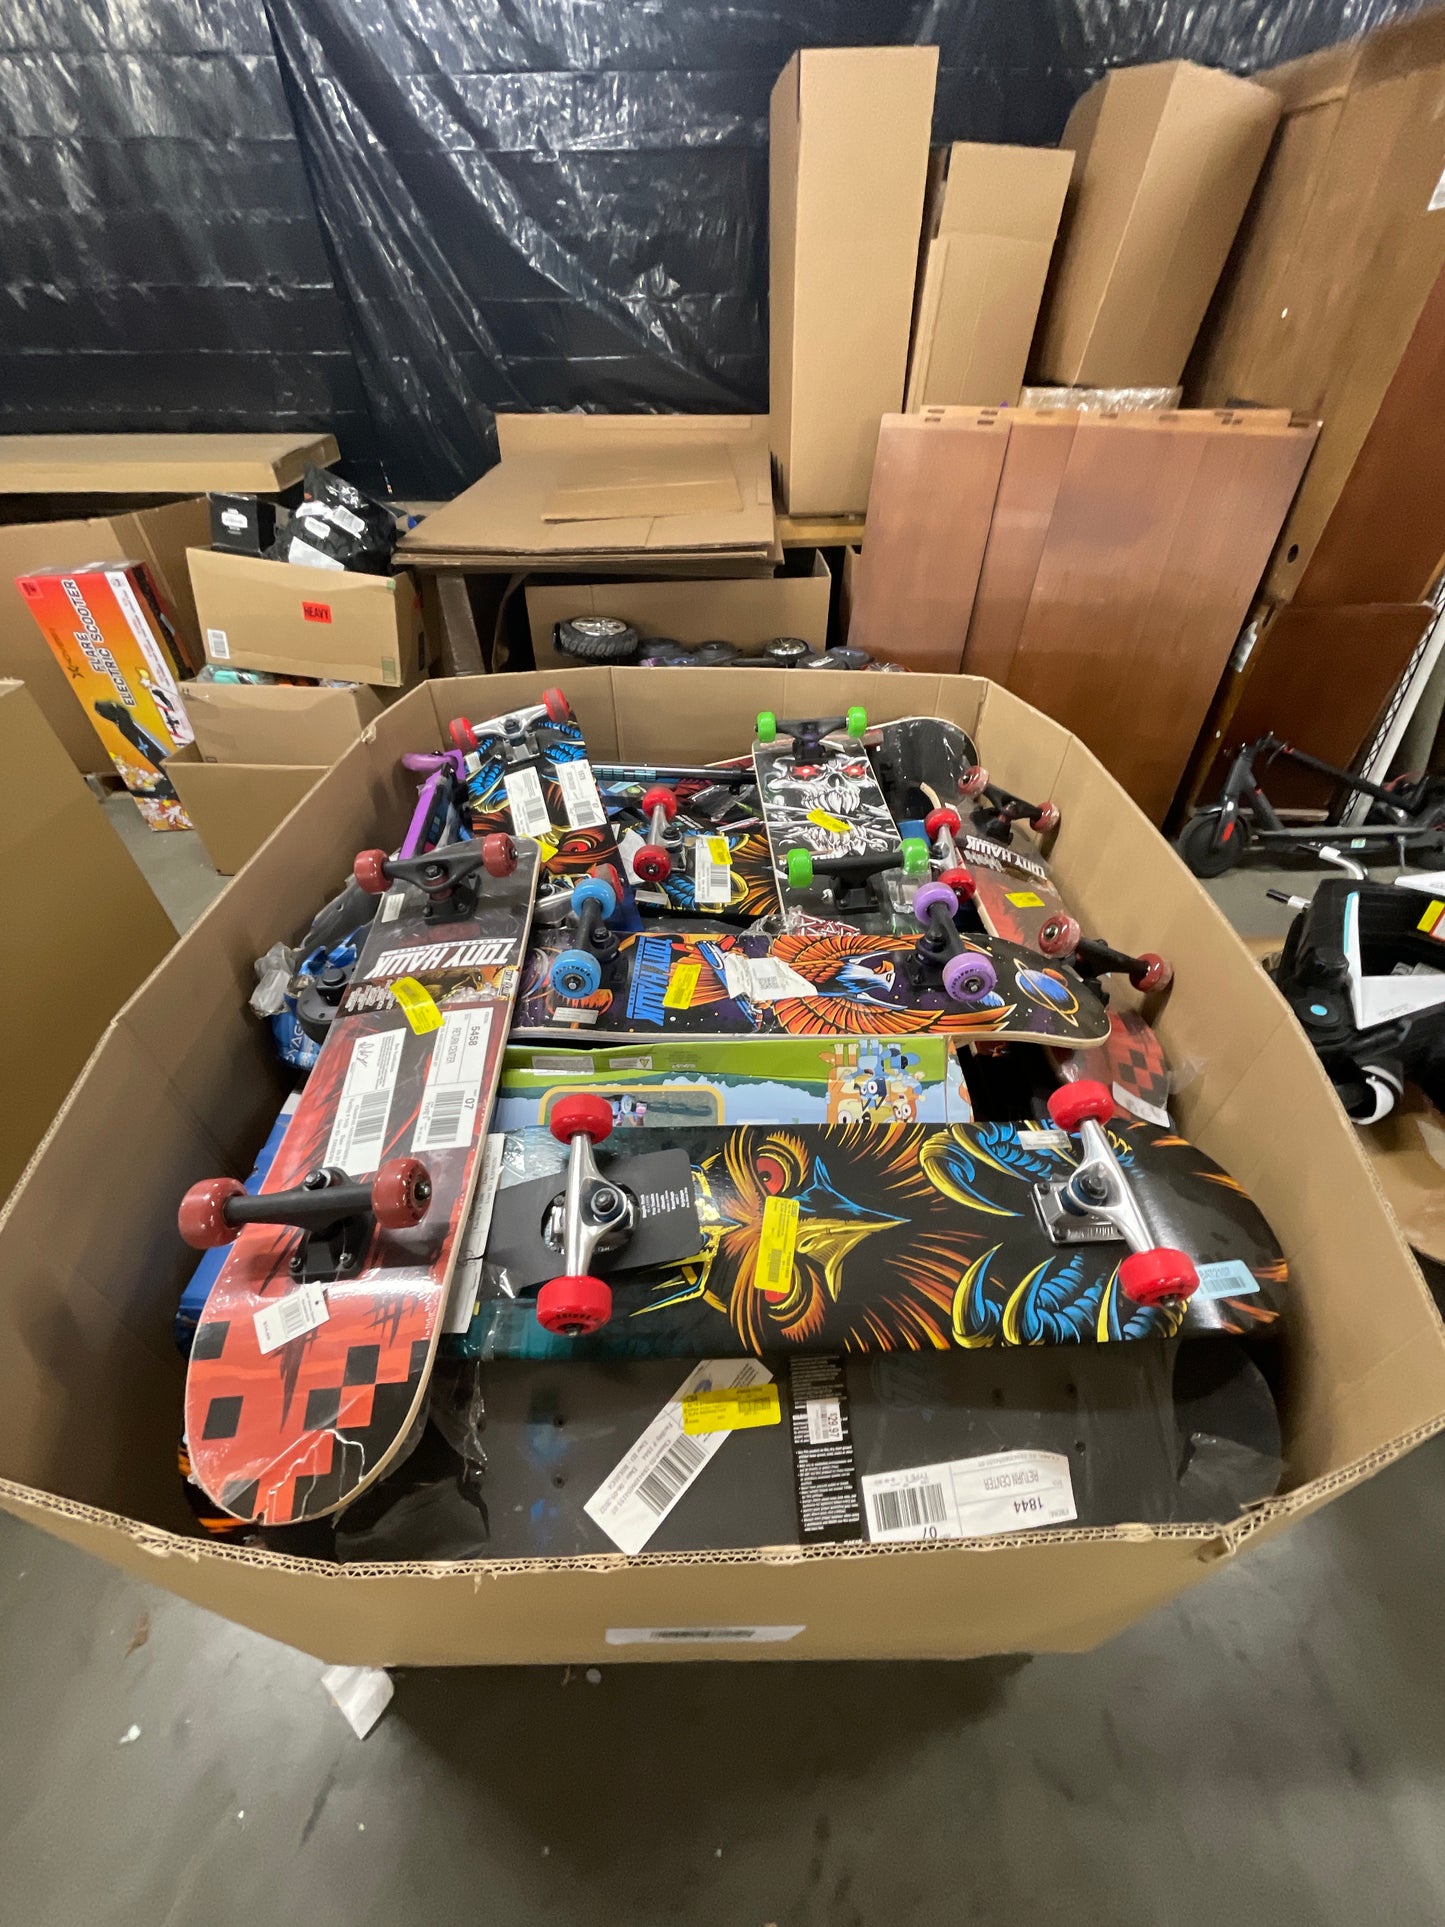 Liquidation Pallet of Toys and Electric Scooters, Pallet-HN